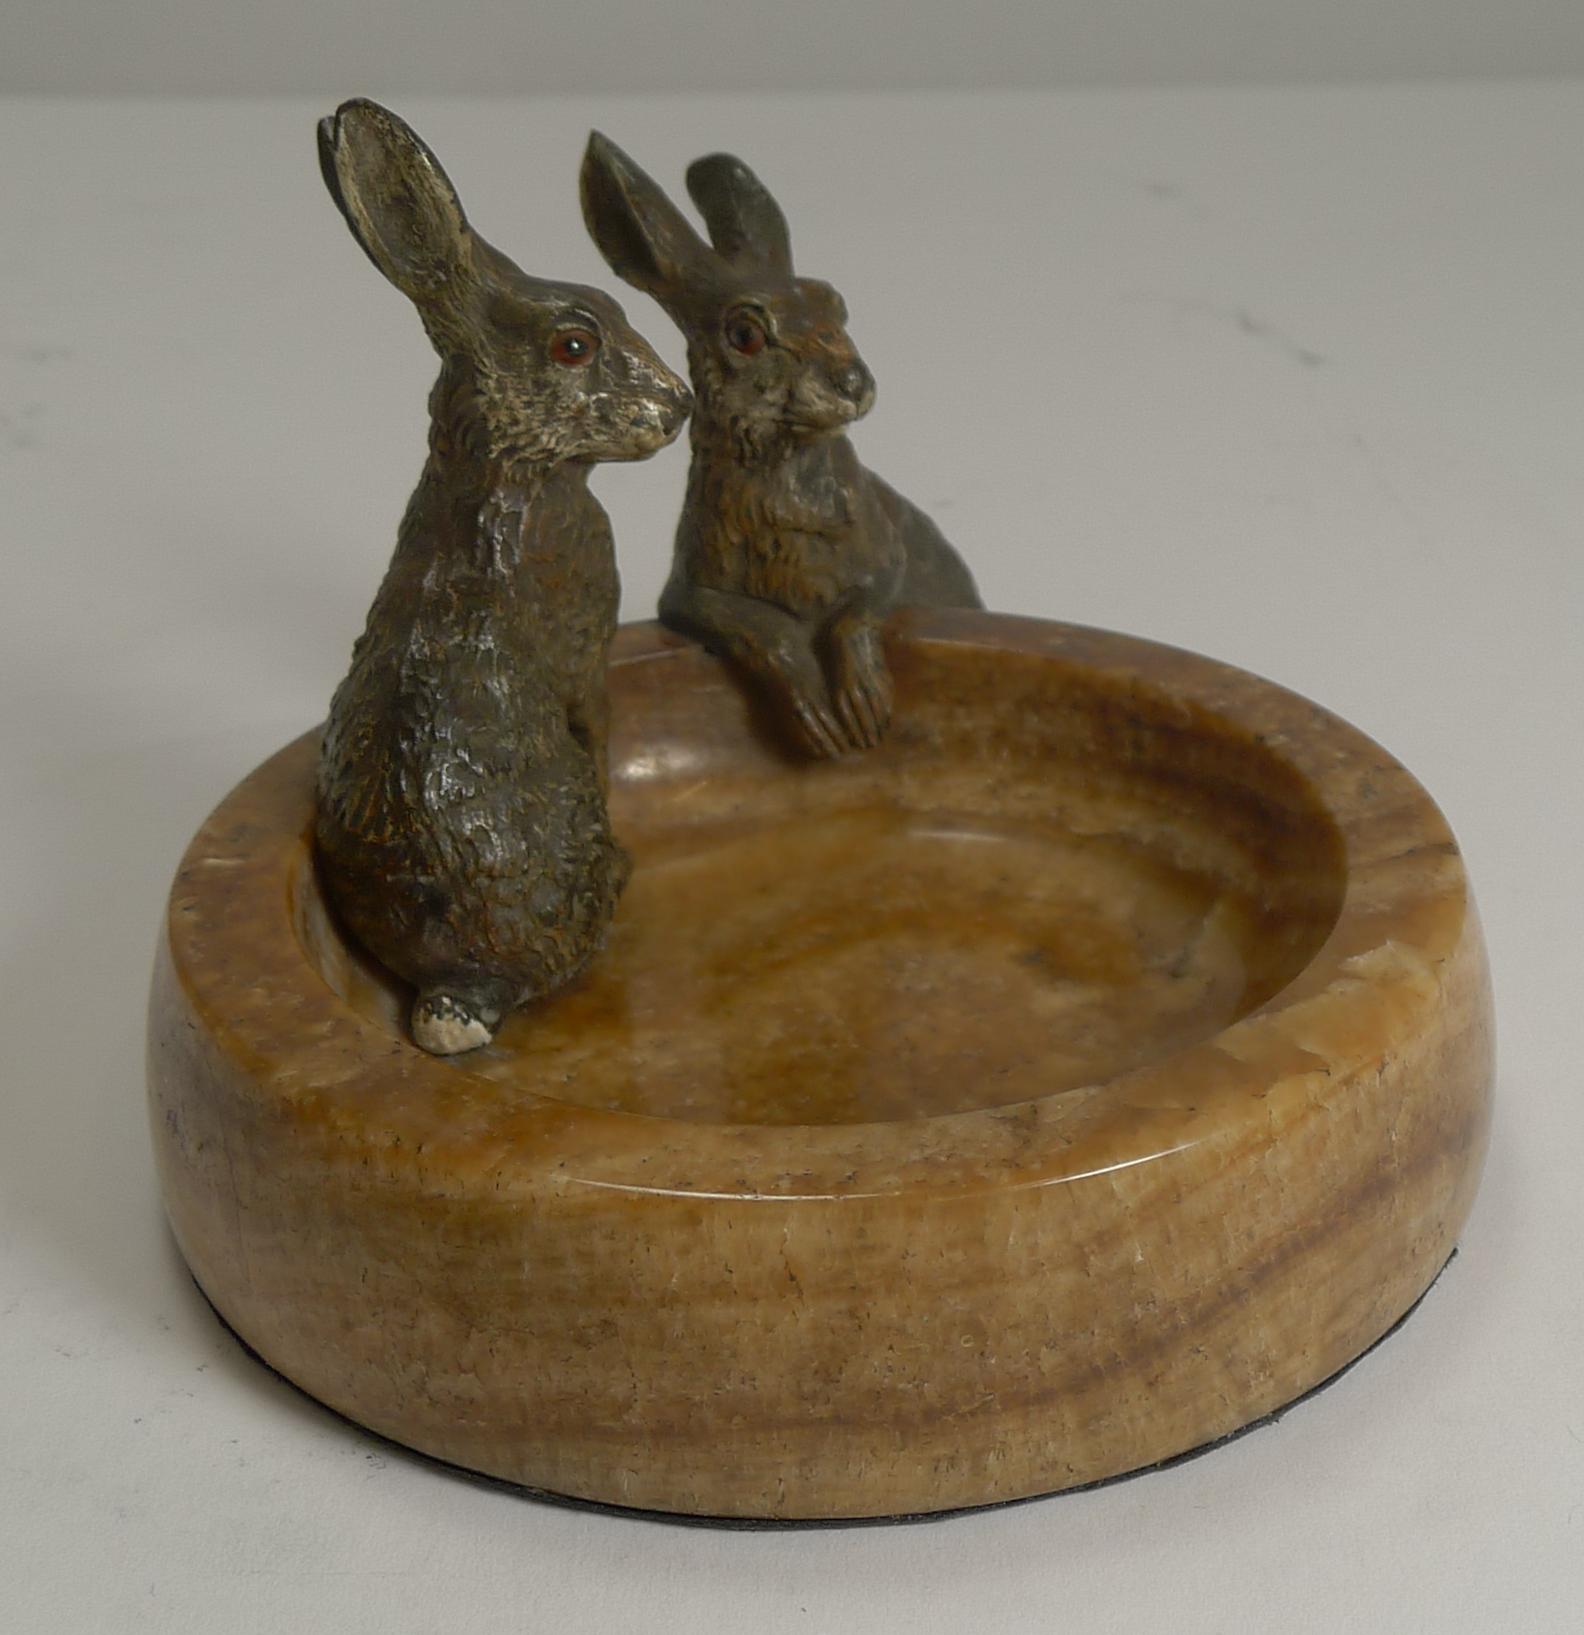 Edwardian Fabulous Austrian Cold Painted Bronze Rabbits or Hares on Onyx Dish, circa 1900